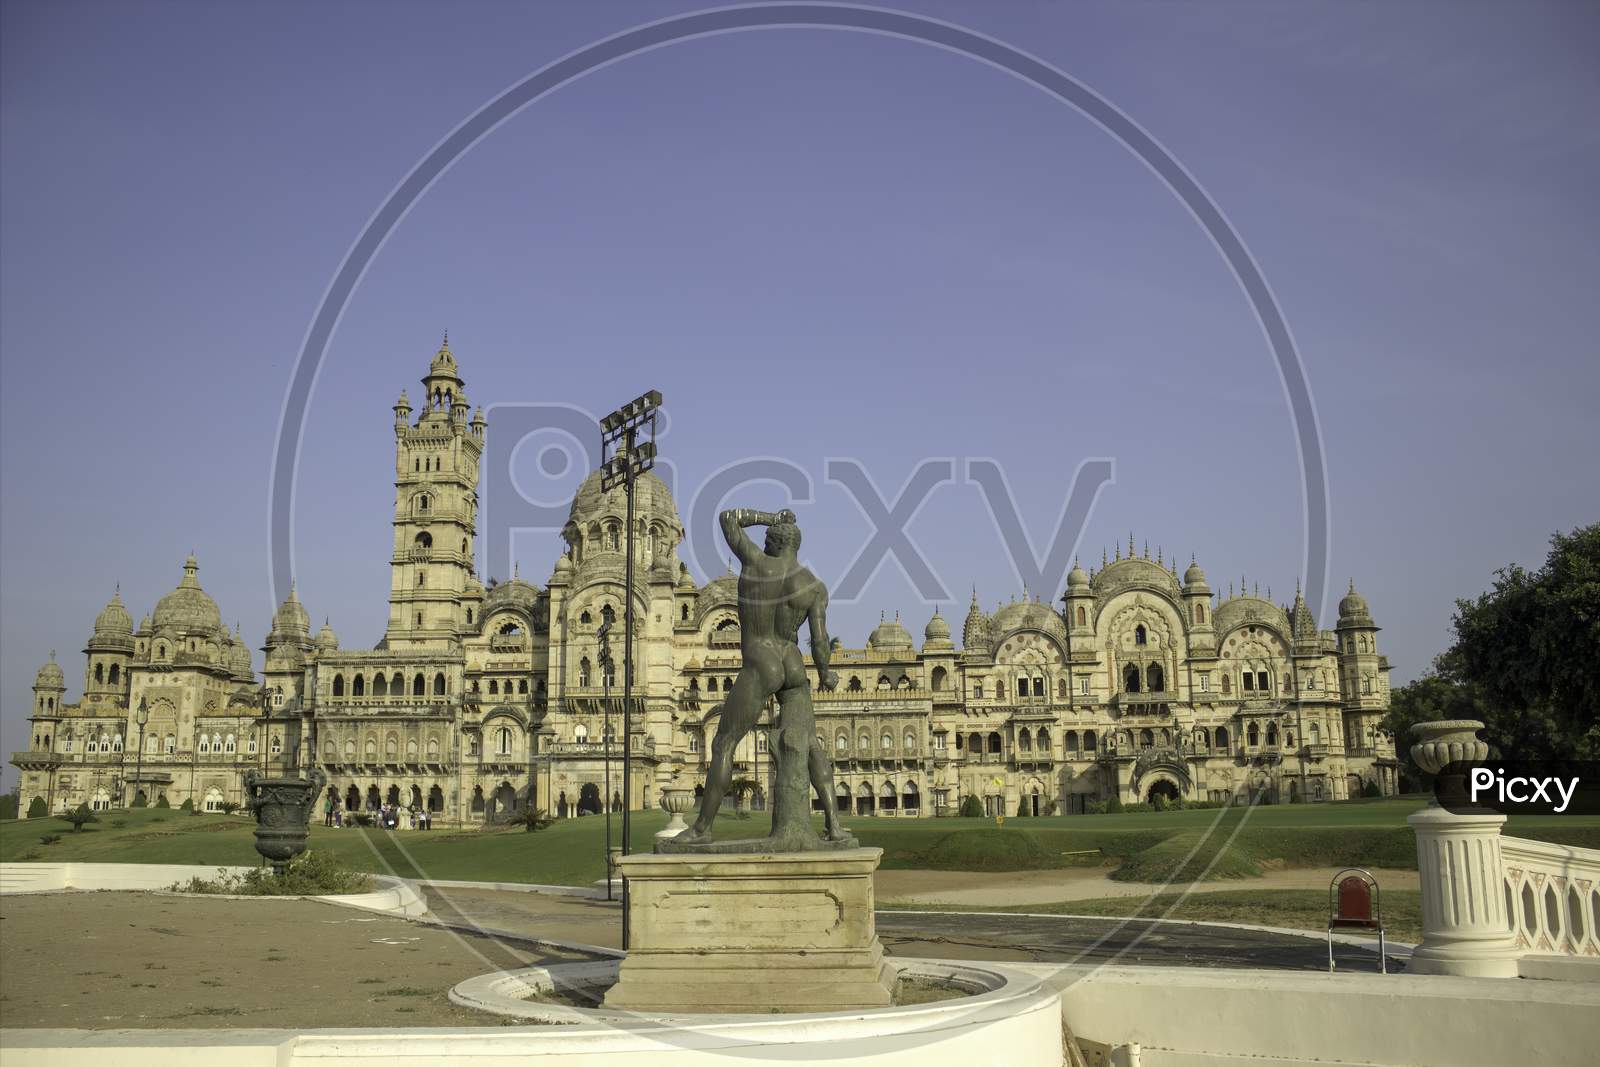 Vadodara, India - November 16, 2012: Front View Of The Lakshmi Vilas Palace In The State Of Gujarat, Was Constructed By The Gaekwad Maratha Family, Who Ruled The Baroda State